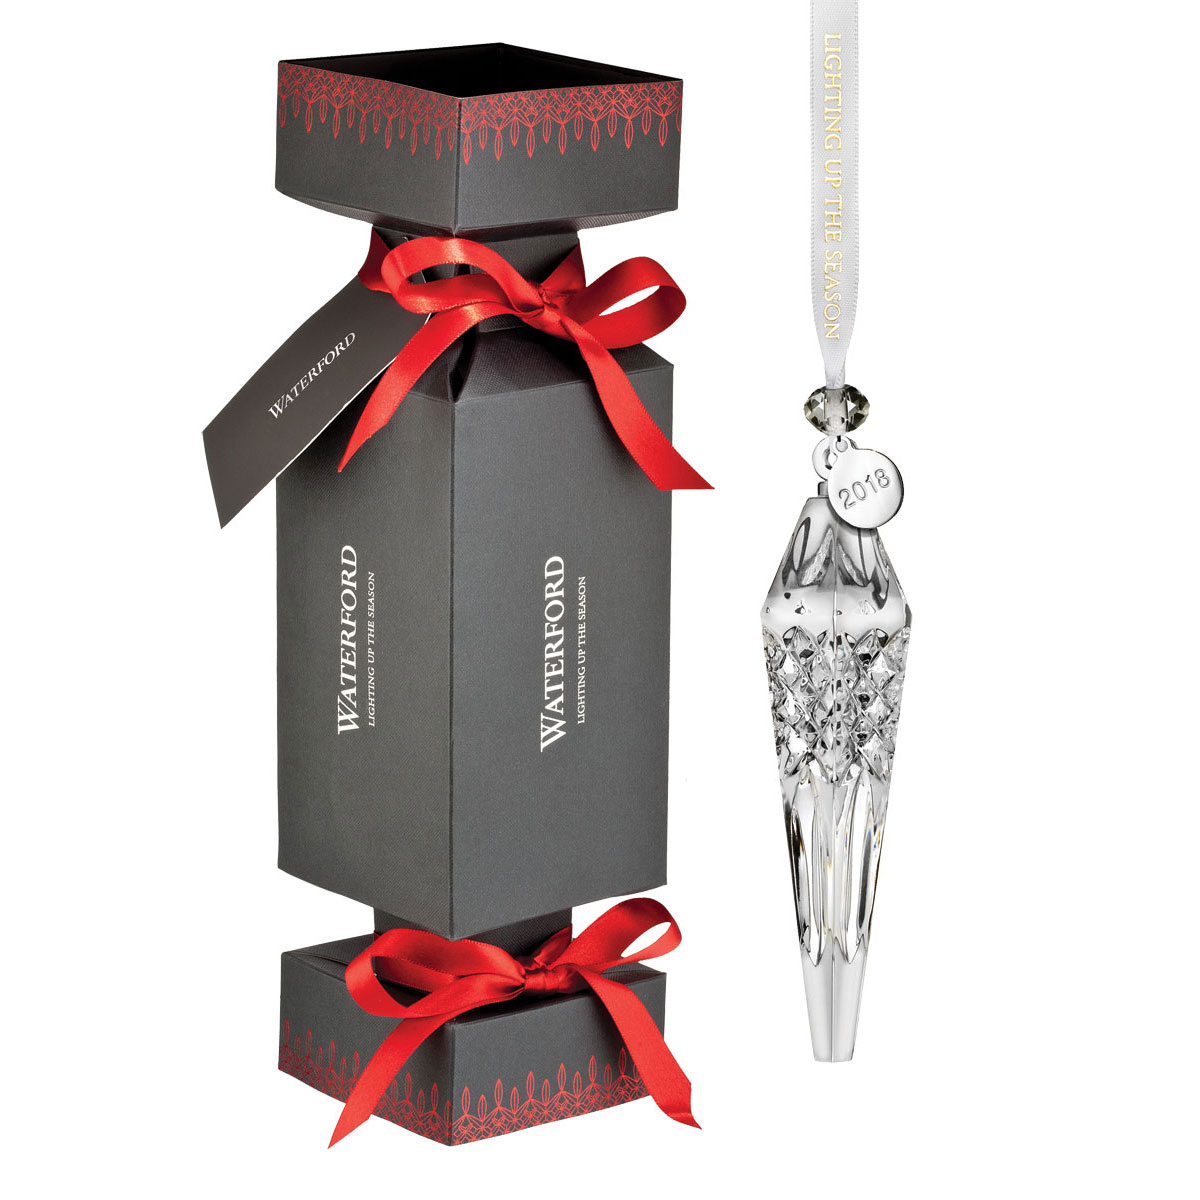 Waterford Crystal 2018 Giftology Holiday Cracker with Icicle Ornament